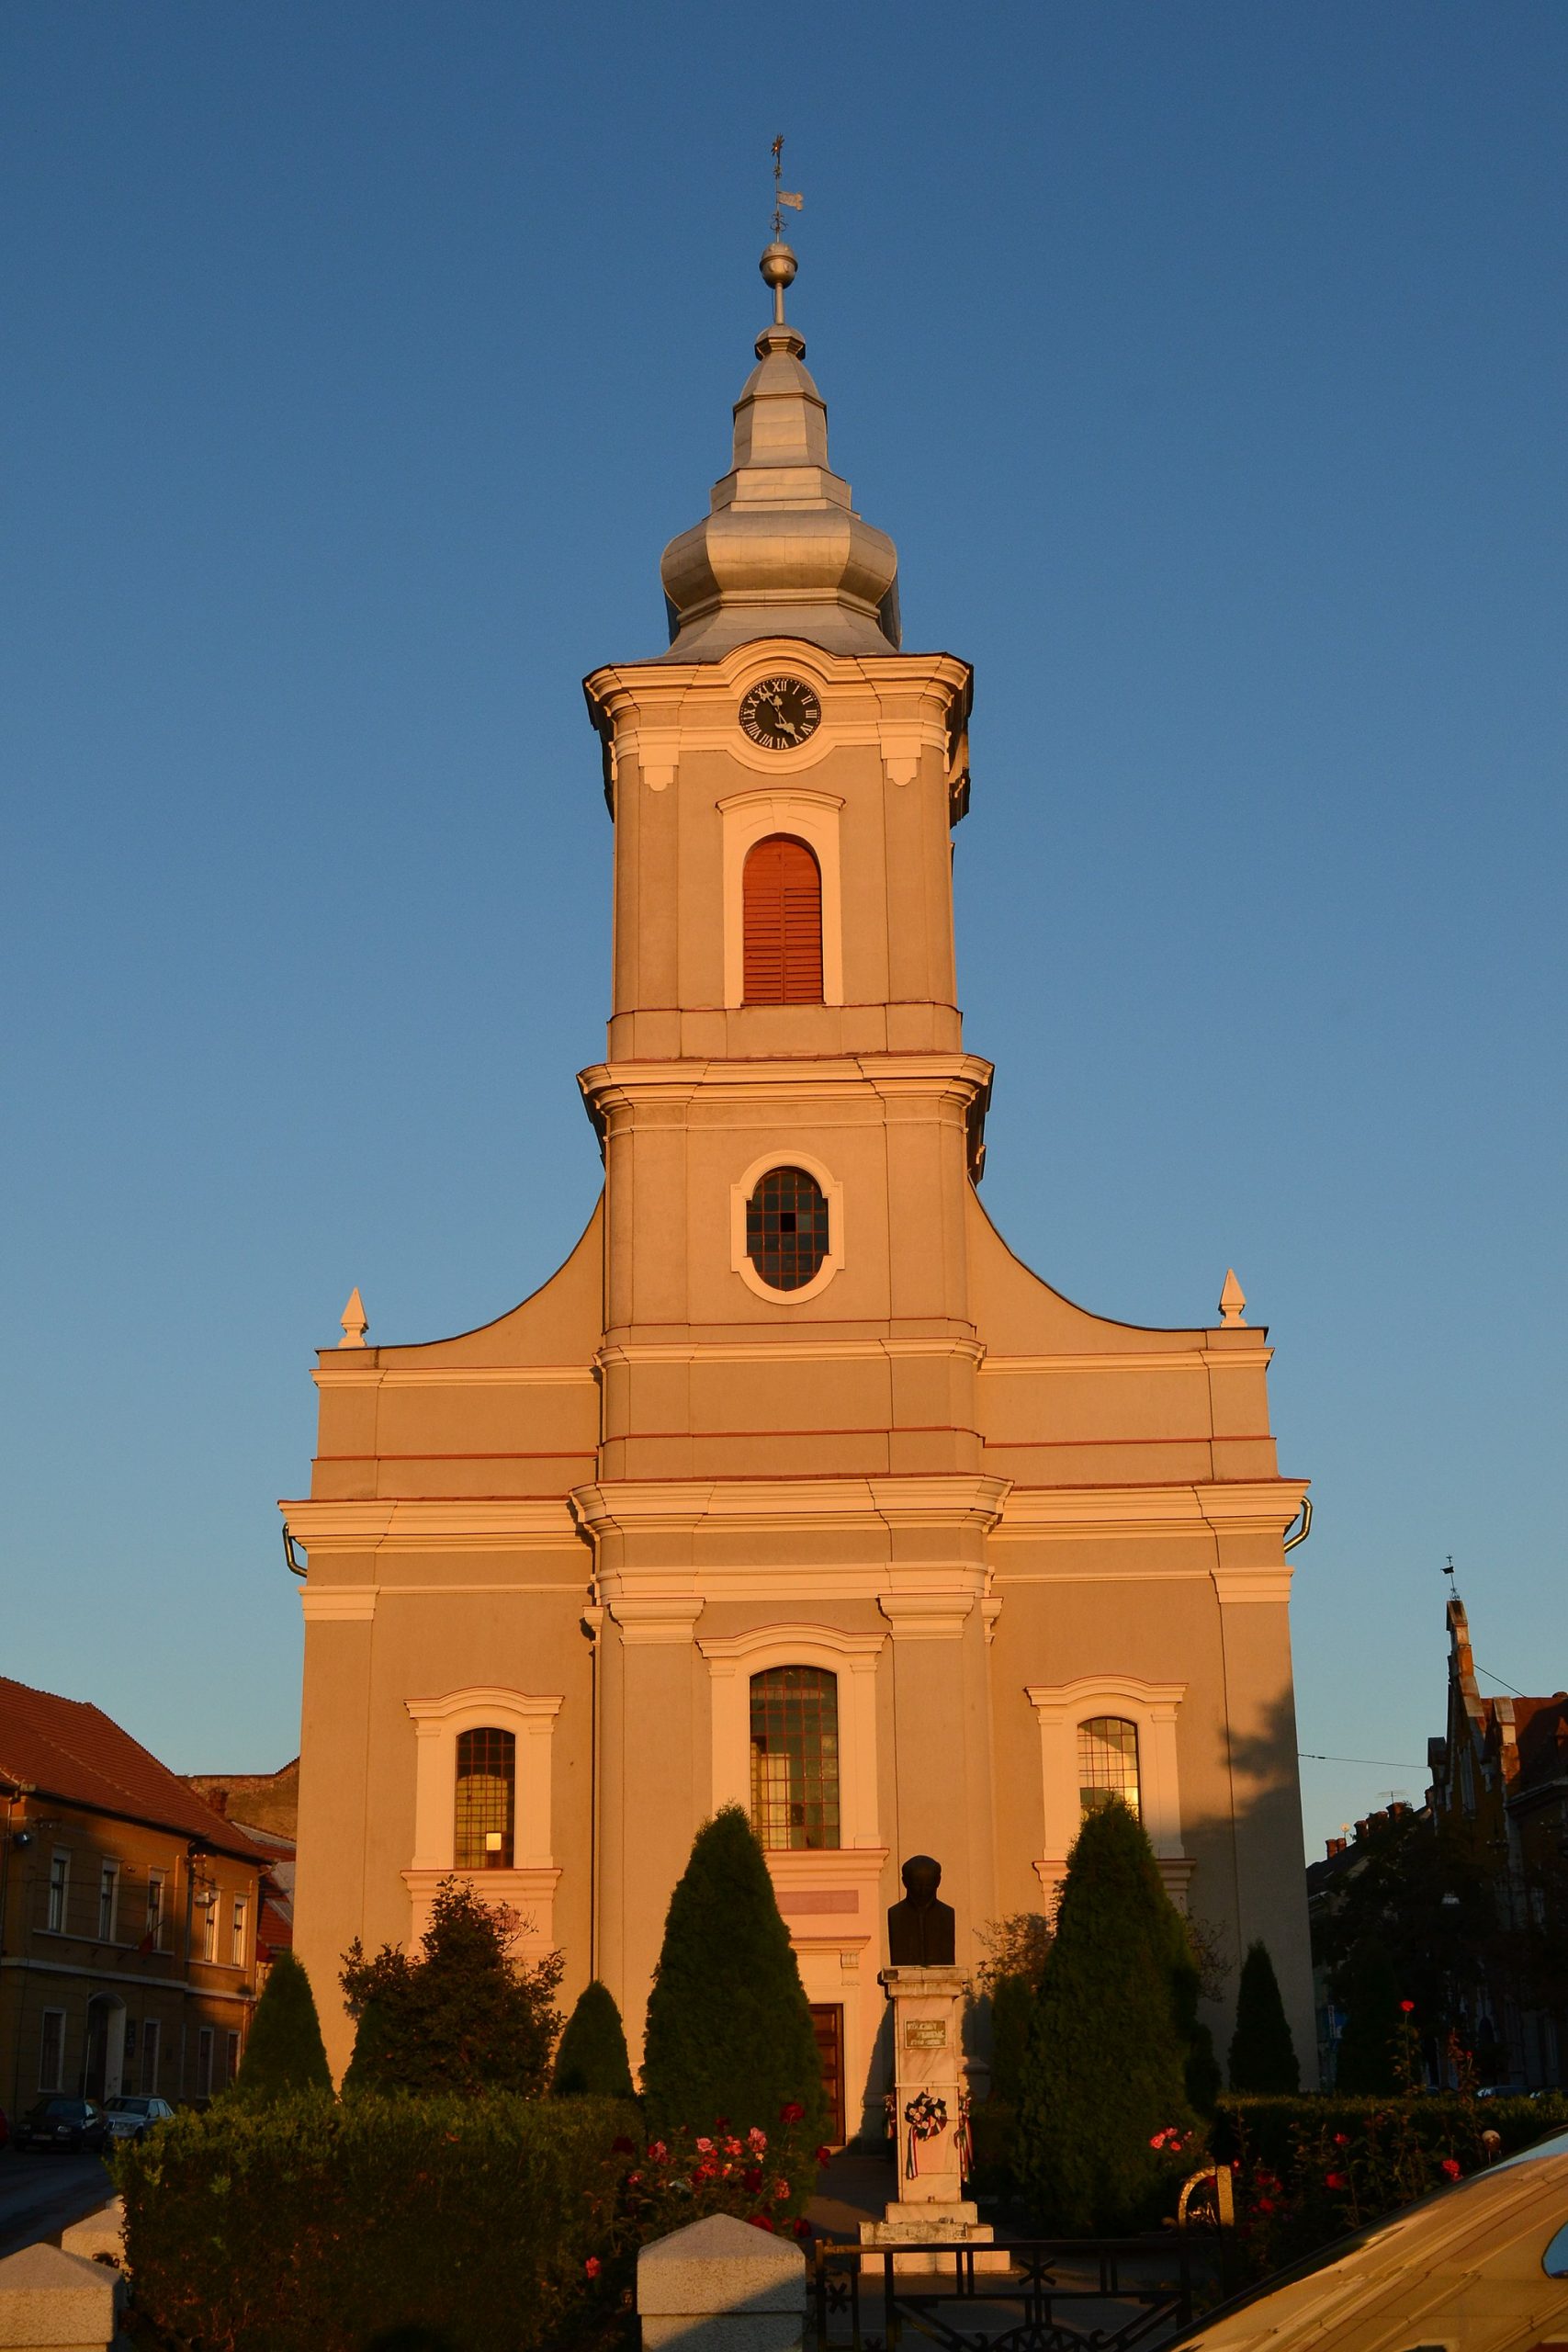 The chain church in Satu Mare during sunset